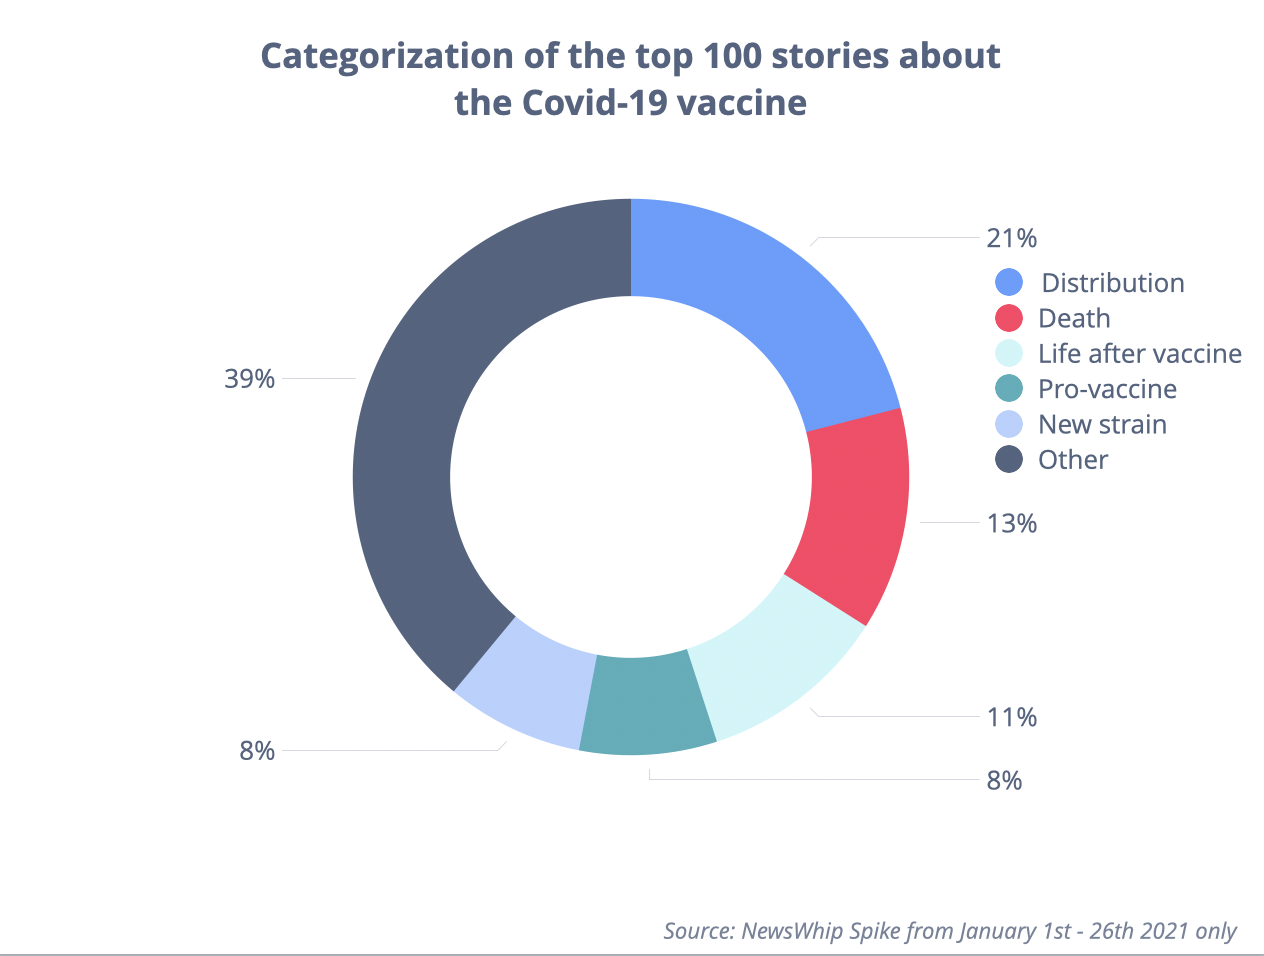 Pie chart of the top 100 vaccine stories by genre